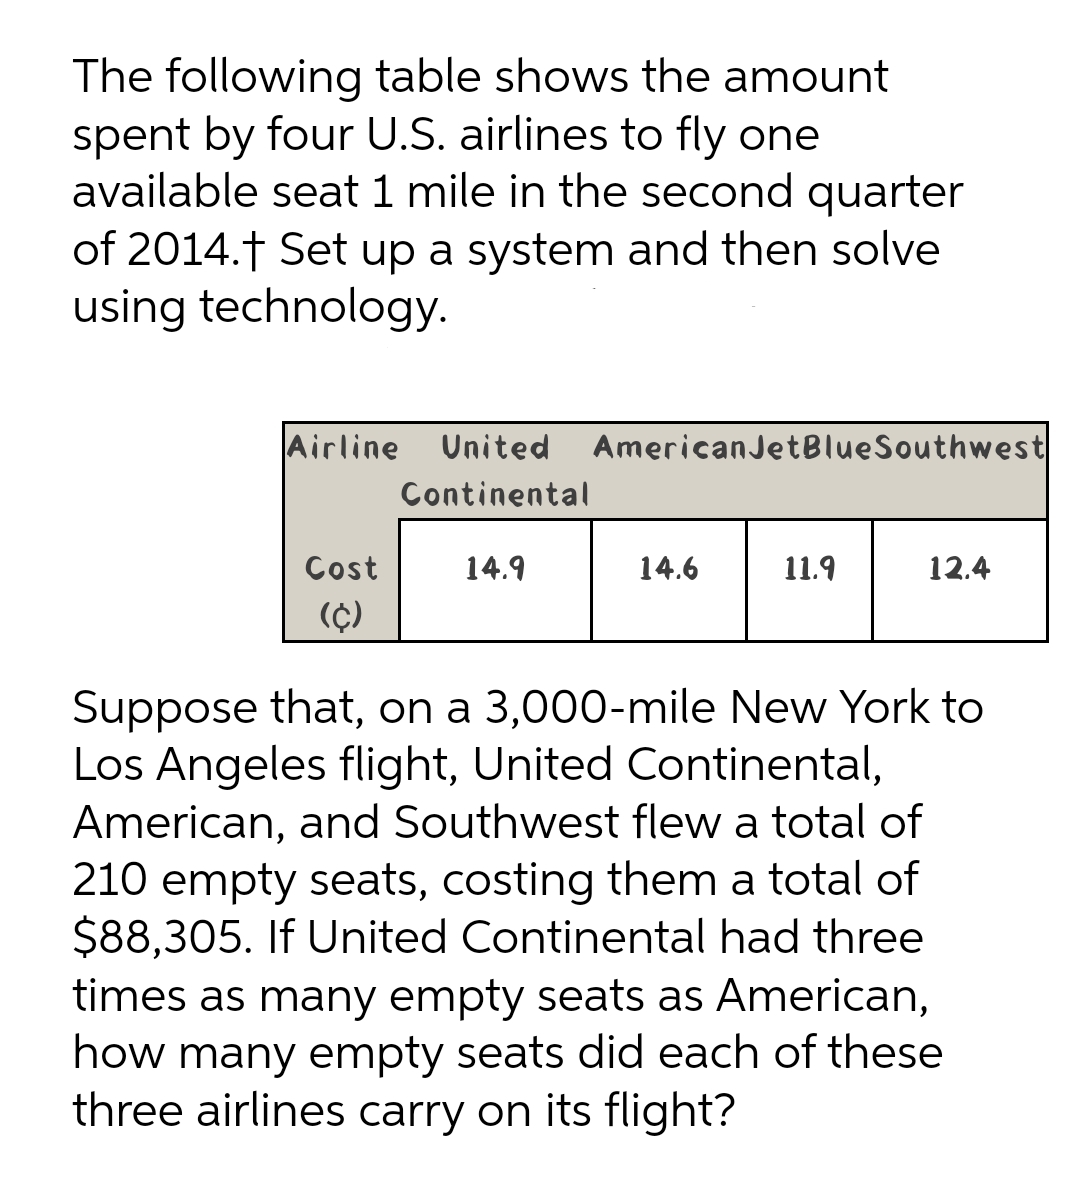 The following table shows the amount
spent by four U.S. airlines to fly one
available seat 1 mile in the second quarter
of 2014.† Set up a system and then solve
using technology.
Airline
United
AmericanJetBlueSouthwest
Continental
Cost
14.9
14.6
11.9
12.4
(Ç)
Suppose that, on a 3,000-mile New York to
Los Angeles flight, United Continental,
American, and Southwest flew a total of
210 empty seats, costing them a total of
$88,305. If United Continental had three
times as many empty seats as American,
how many empty seats did each of these
three airlines carry on its flight?
